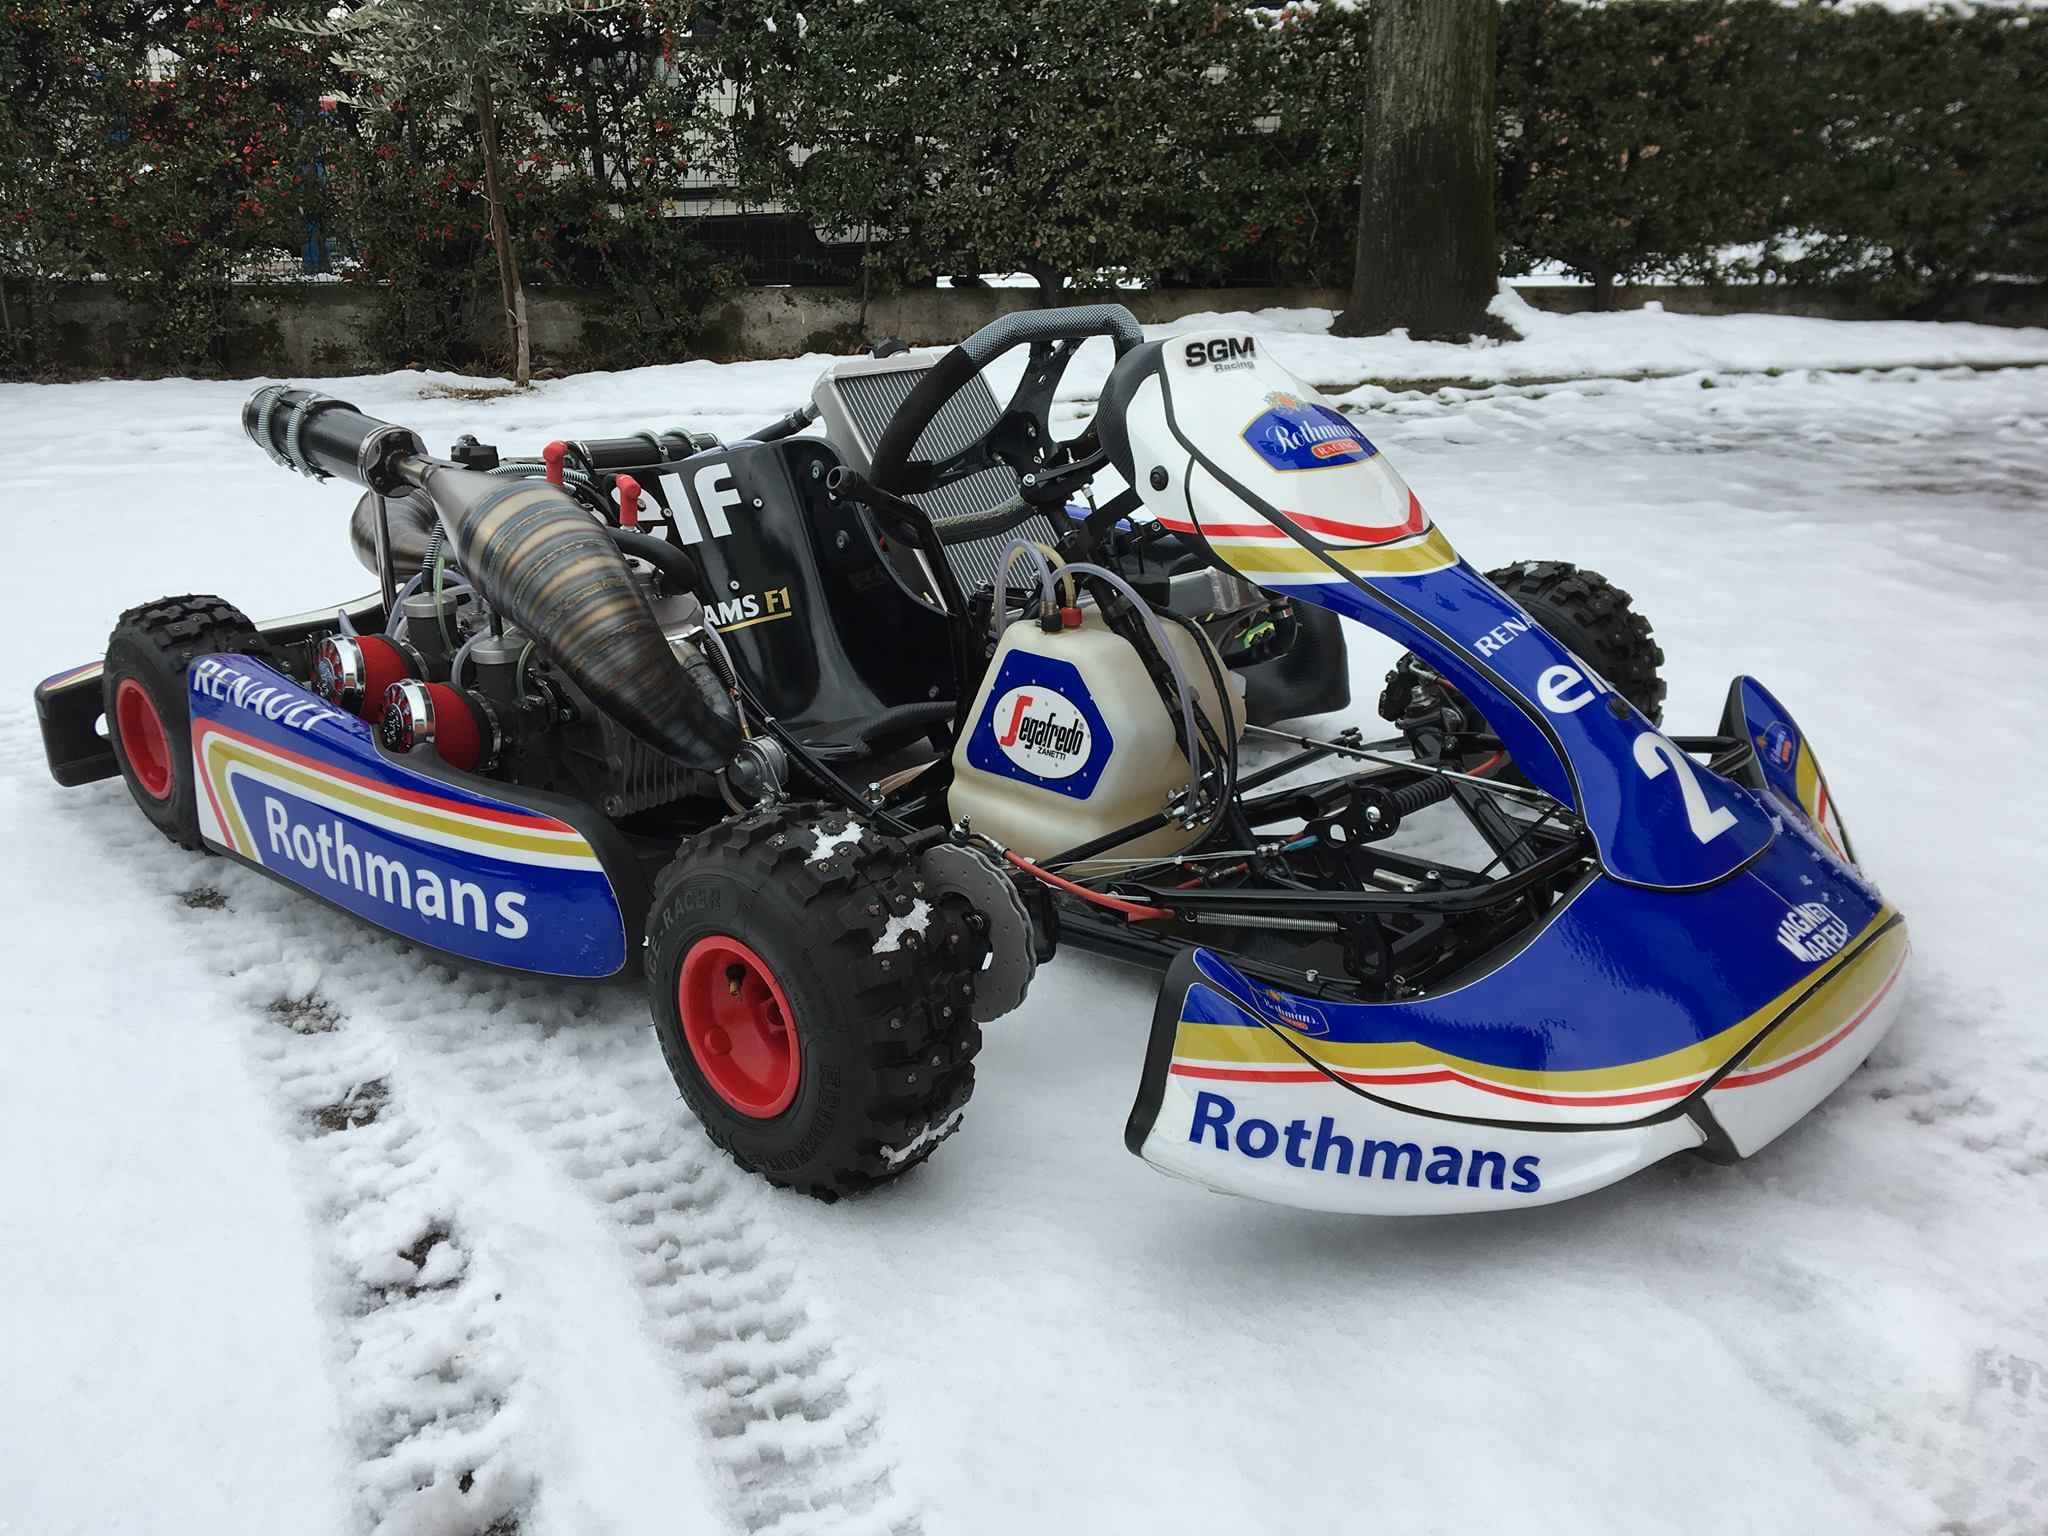 SGM’s 100HP Ice Racing kart in Williams F1 Renault livery.